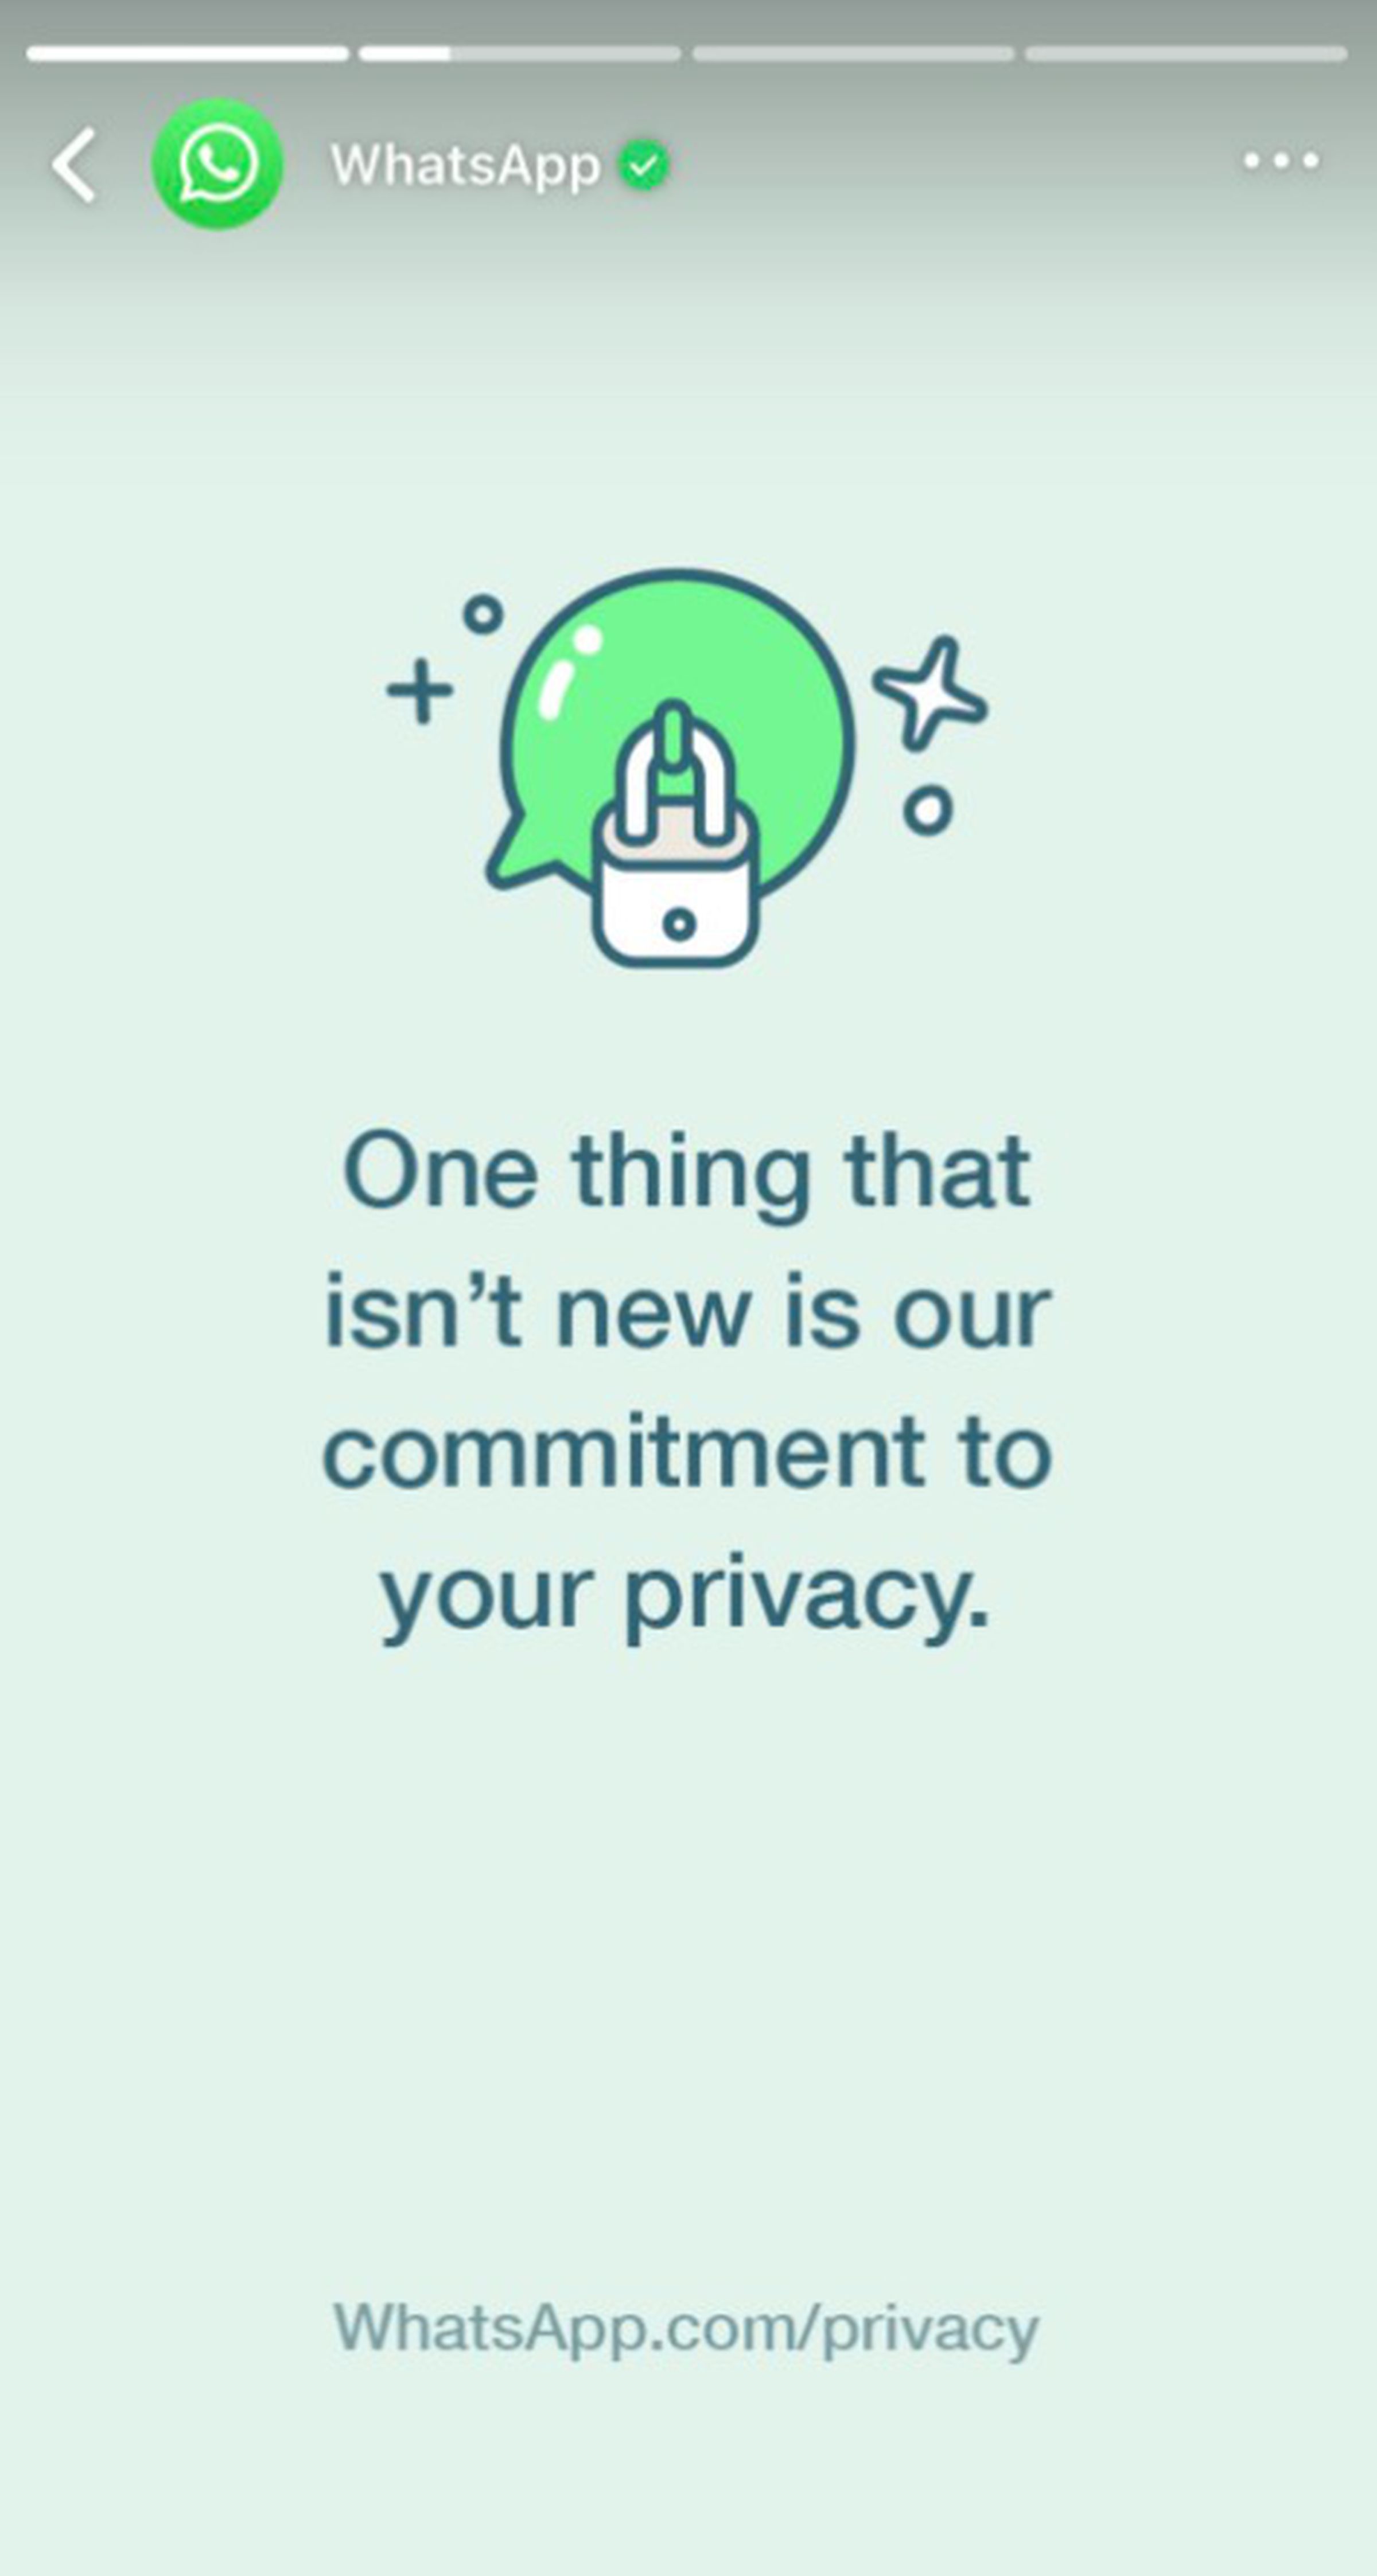 WhatsApp adds Status updates about its privacy policy